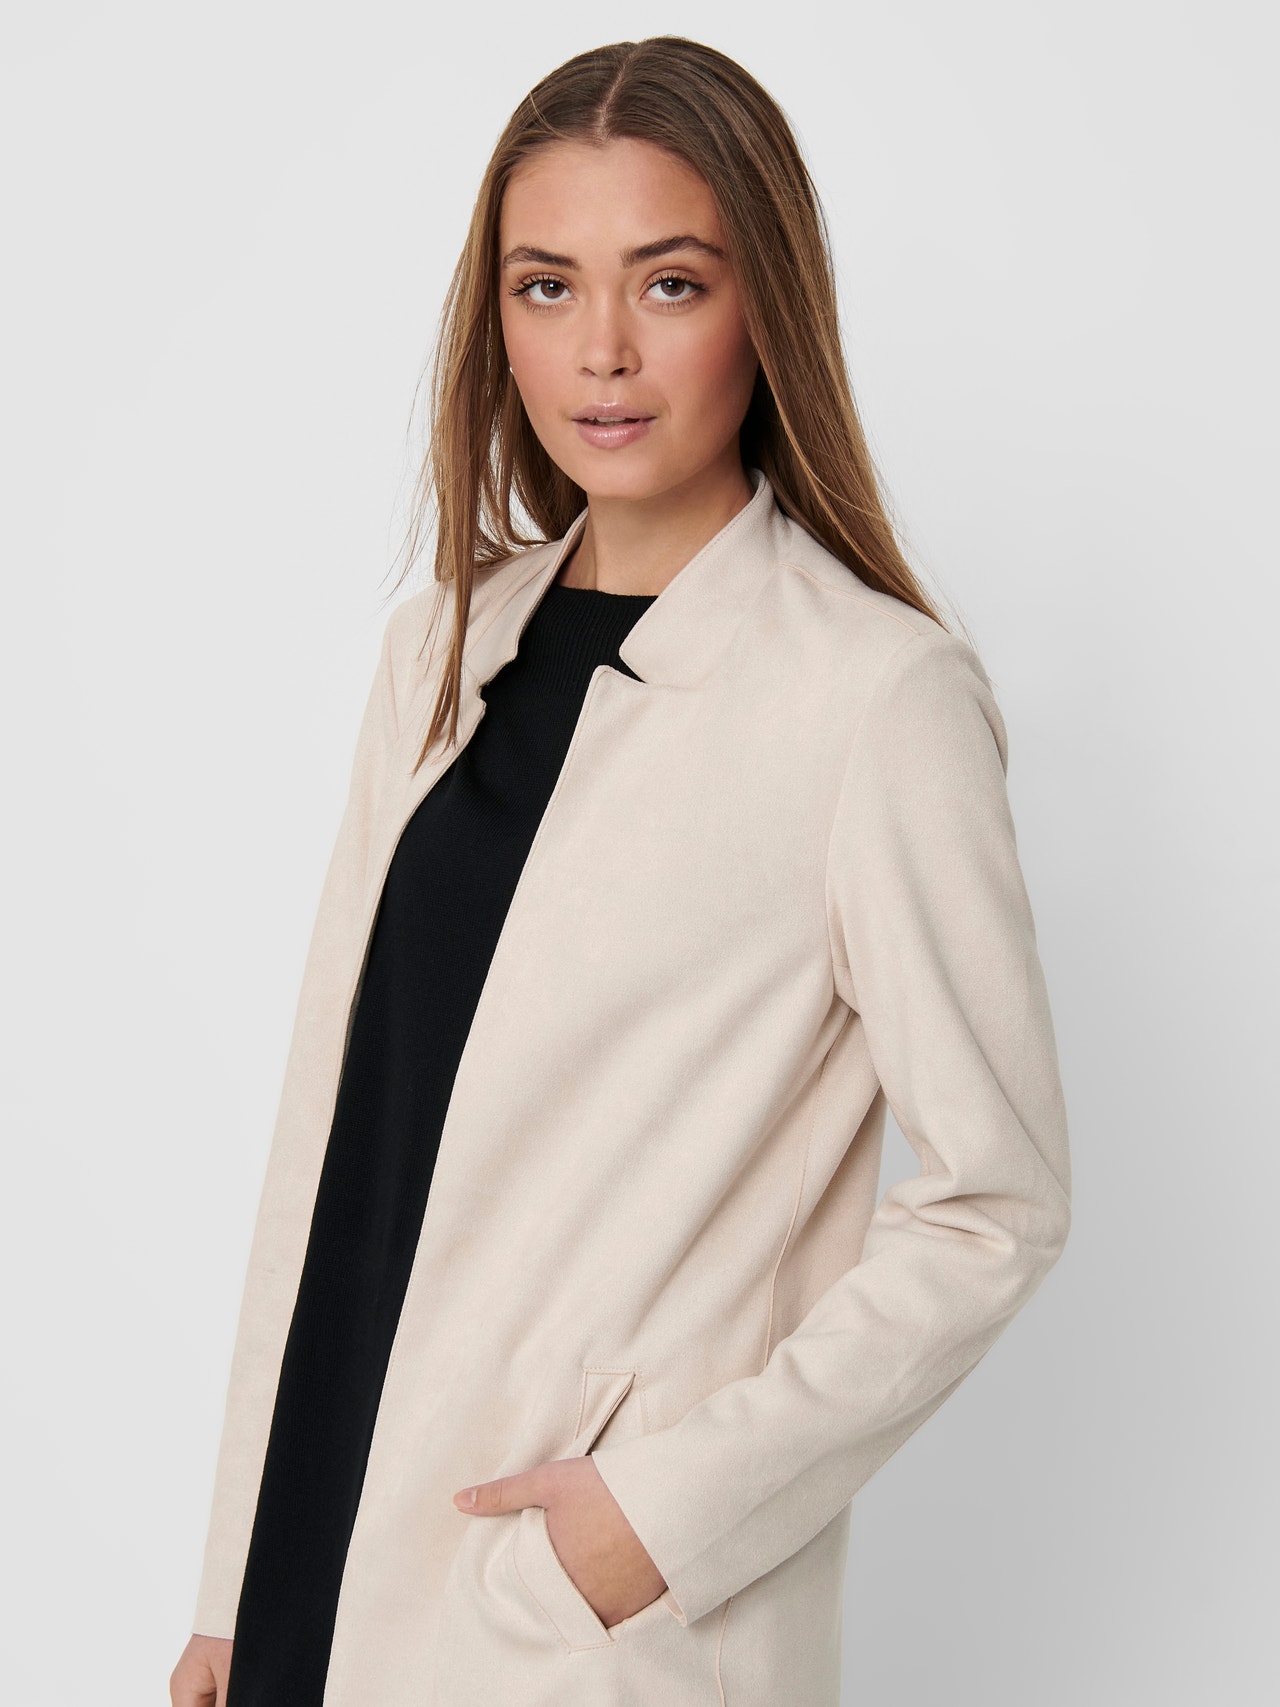 ONLY Spread collar Coat -Pumice Stone - 15218563